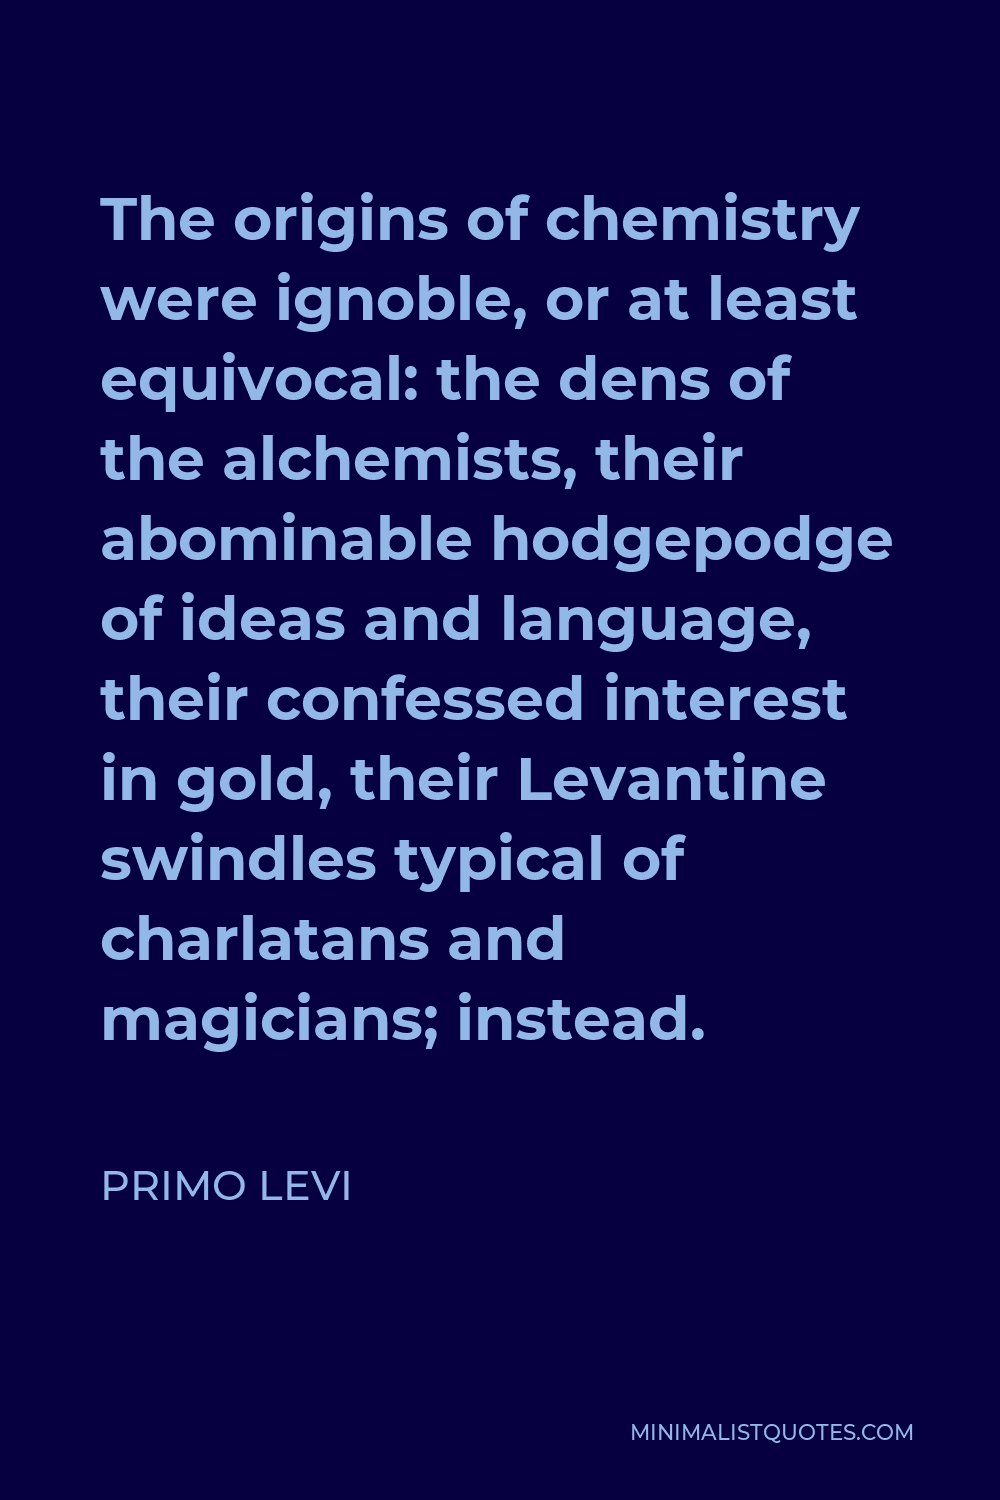 Primo Levi Quote - The origins of chemistry were ignoble, or at least equivocal: the dens of the alchemists, their abominable hodgepodge of ideas and language, their confessed interest in gold, their Levantine swindles typical of charlatans and magicians; instead.